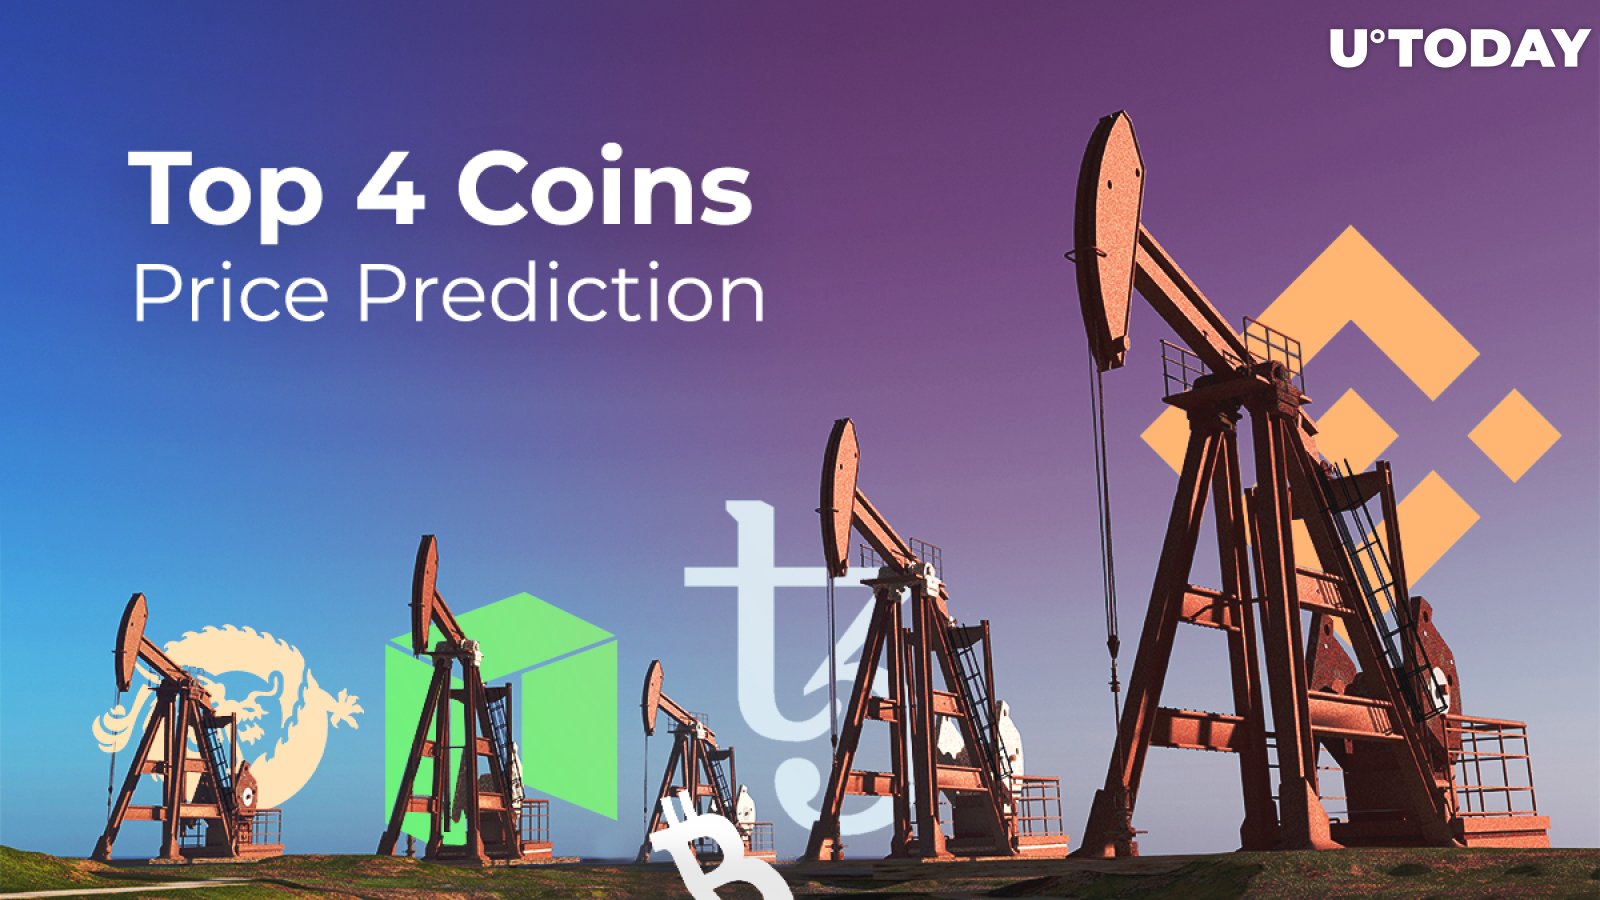 Top 4 Coins Price Prediction Growing Faster Against Bitcoin: Binance Coin (BNB), Bitcoin SV (BSV), Tezos (XTZ), NEO — Specific Reasons for Going Up or Following the General Growth?